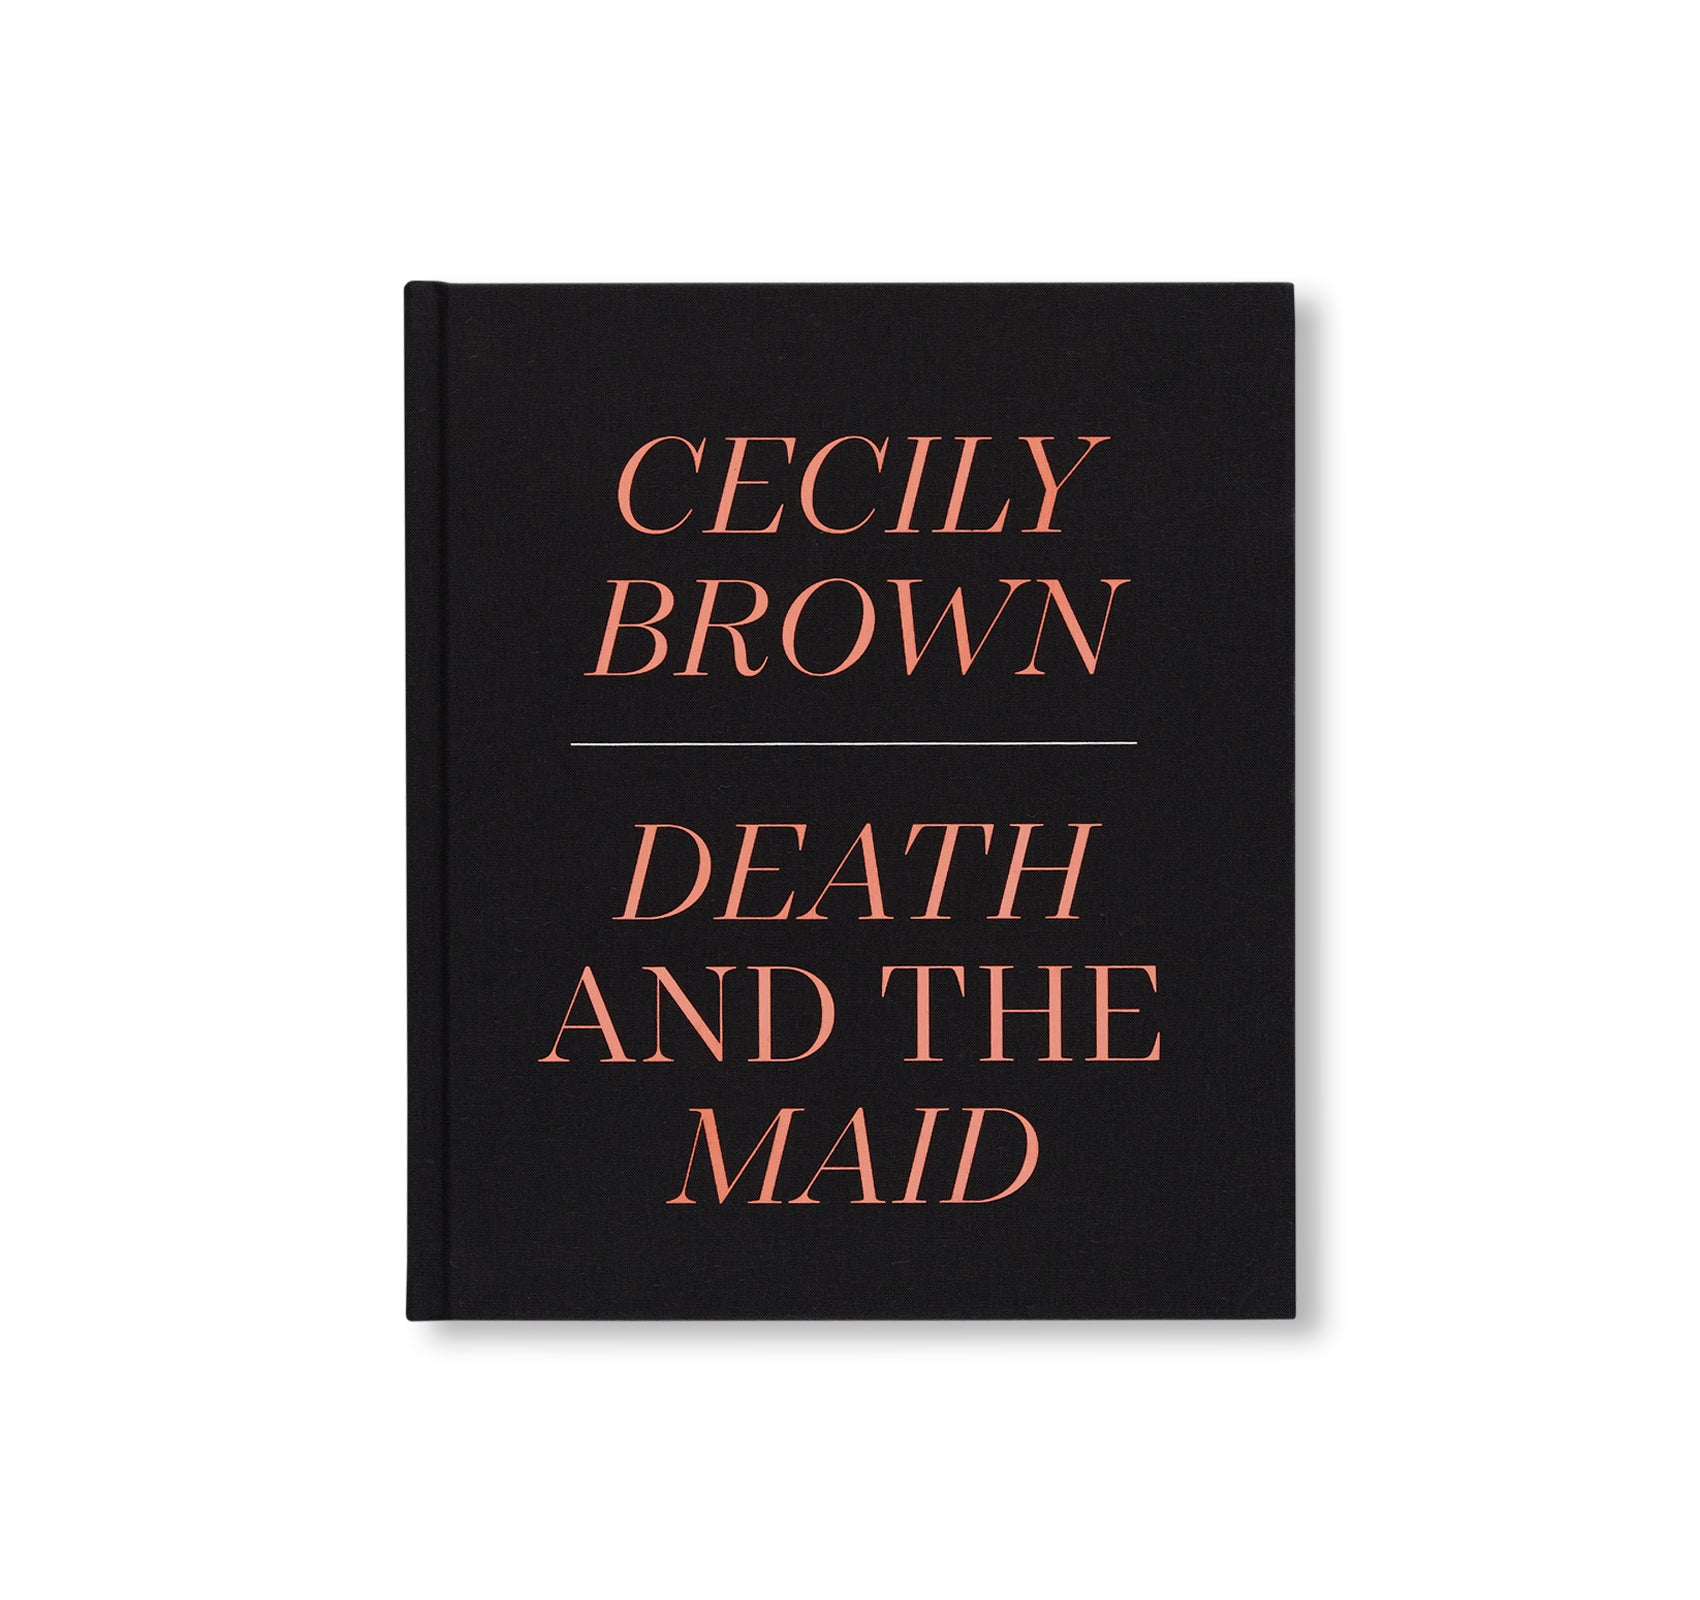 MAID　Cecily　by　DEATH　twelvebooks　AND　THE　Brown　–